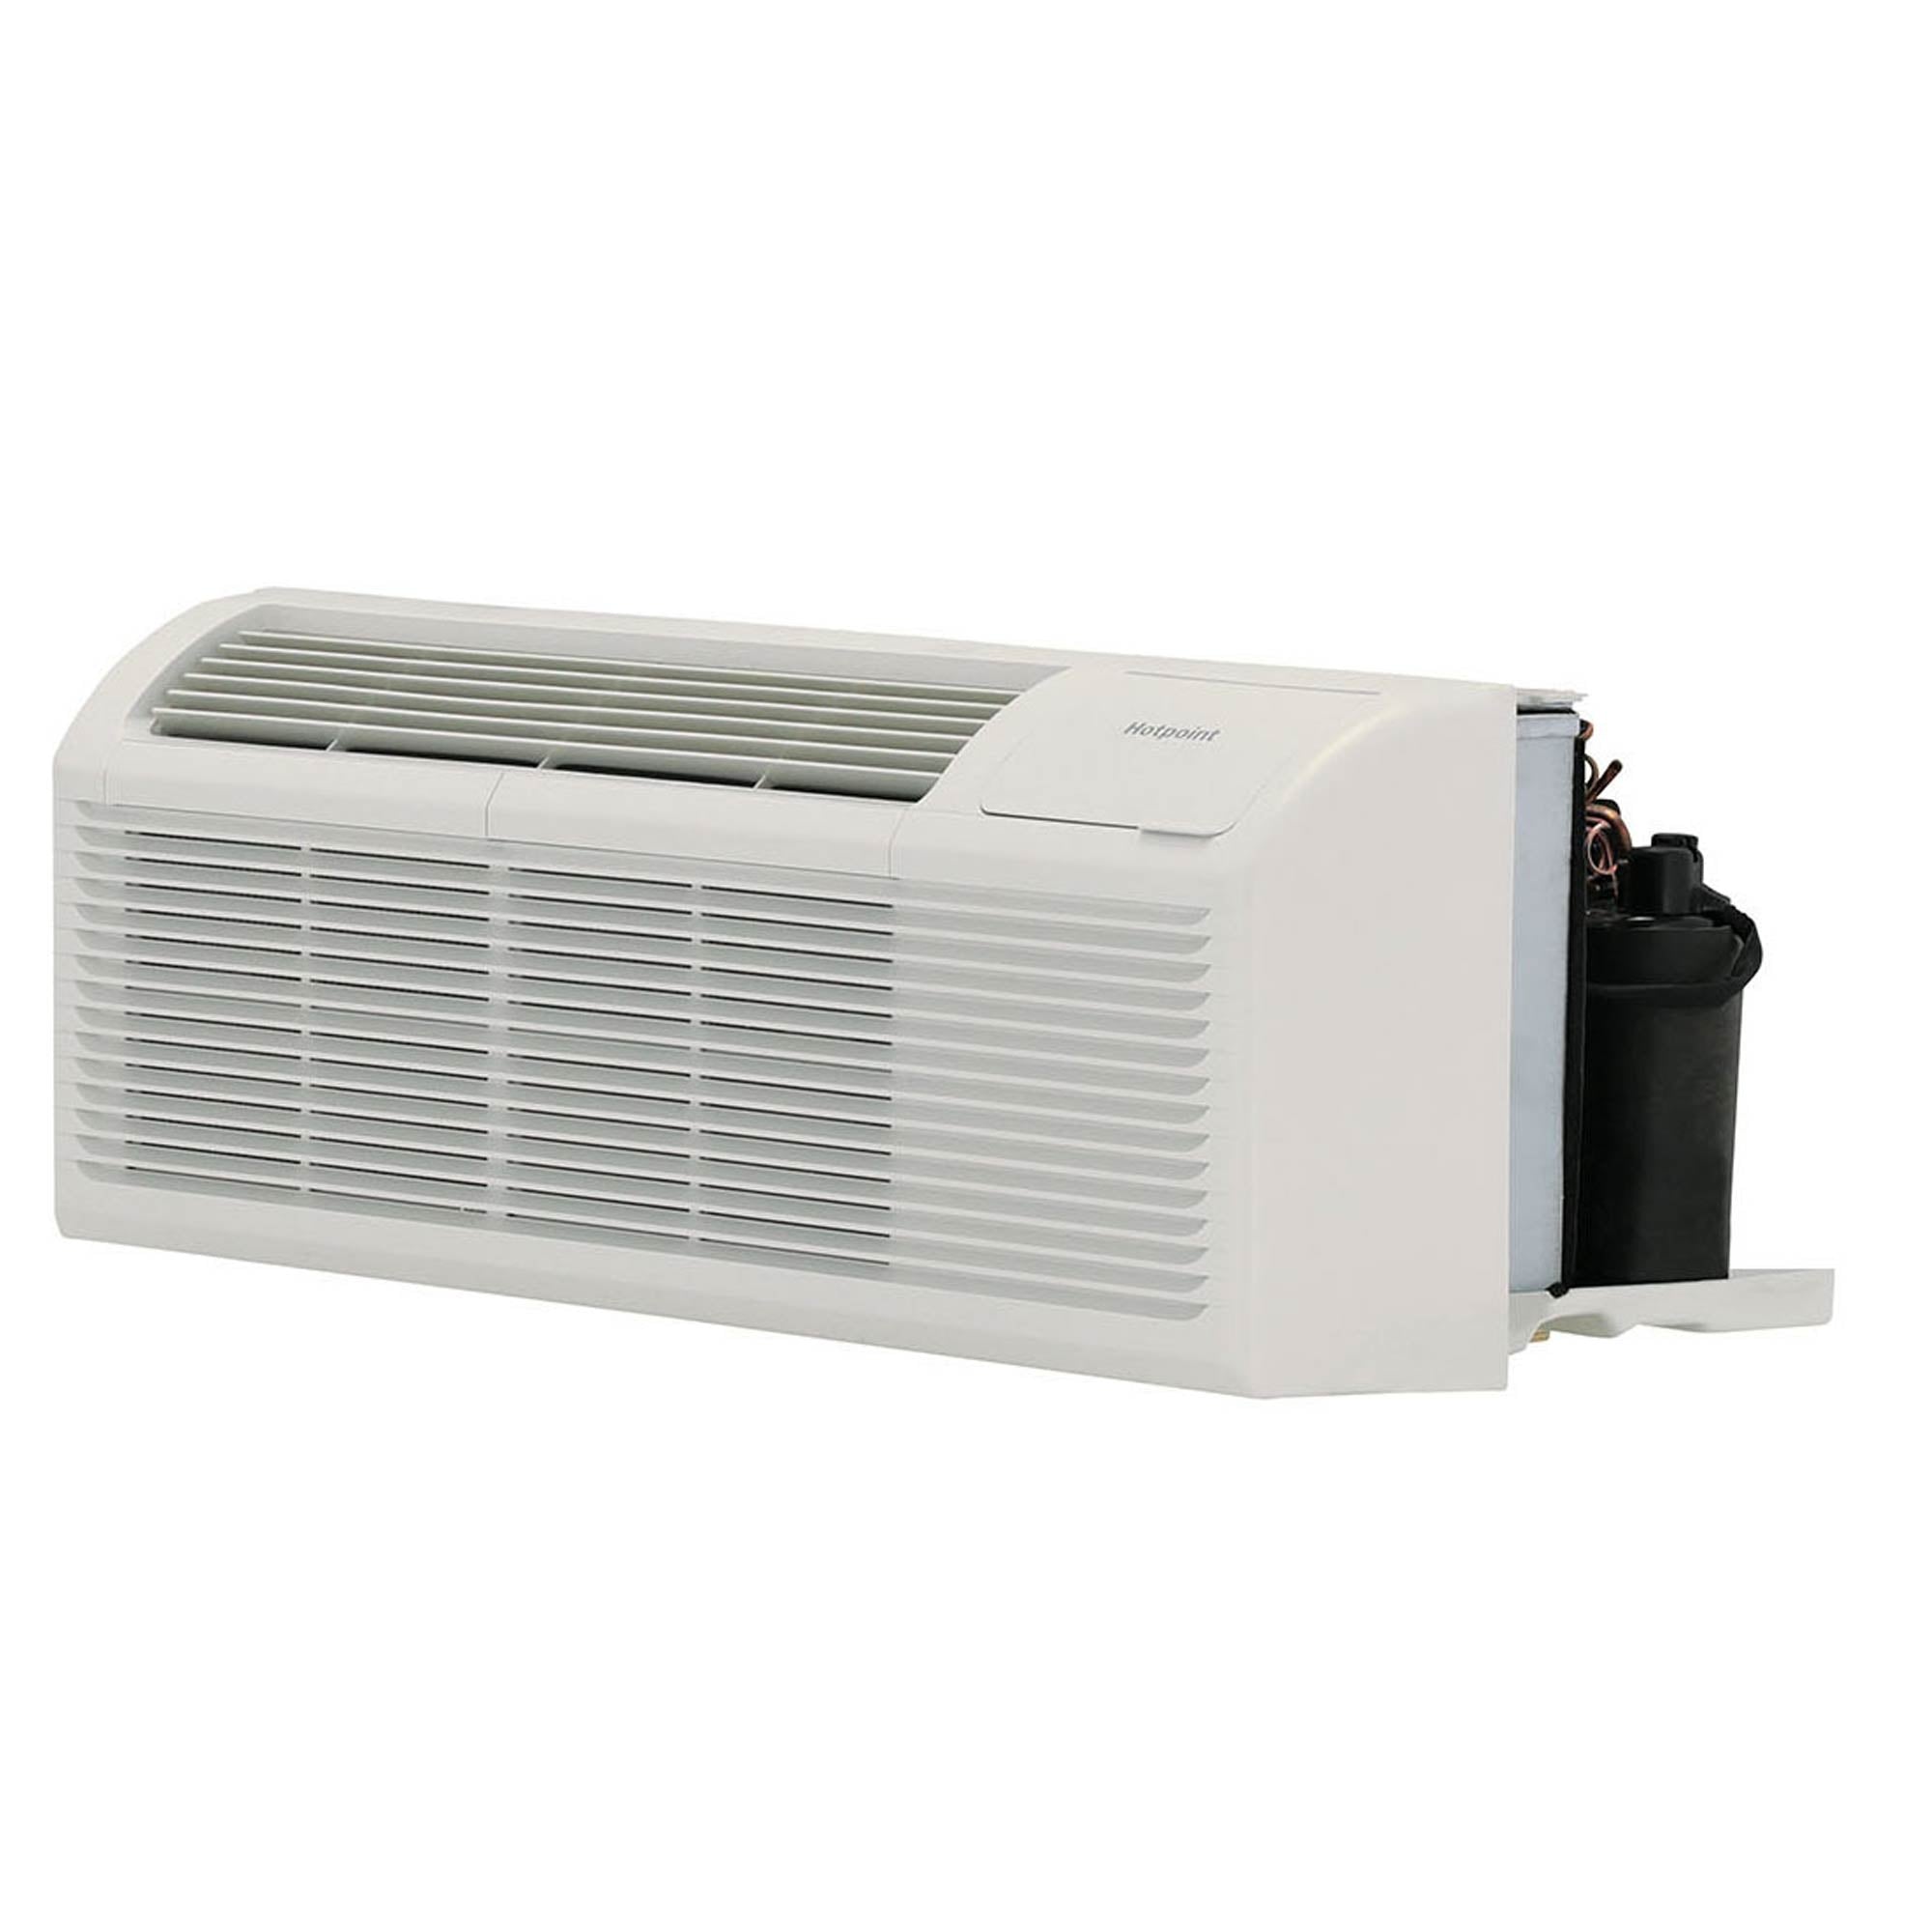 Hotpoint 7,200 BTU PTAC Heat Pump and 3.4 kW Electric Heat Backup